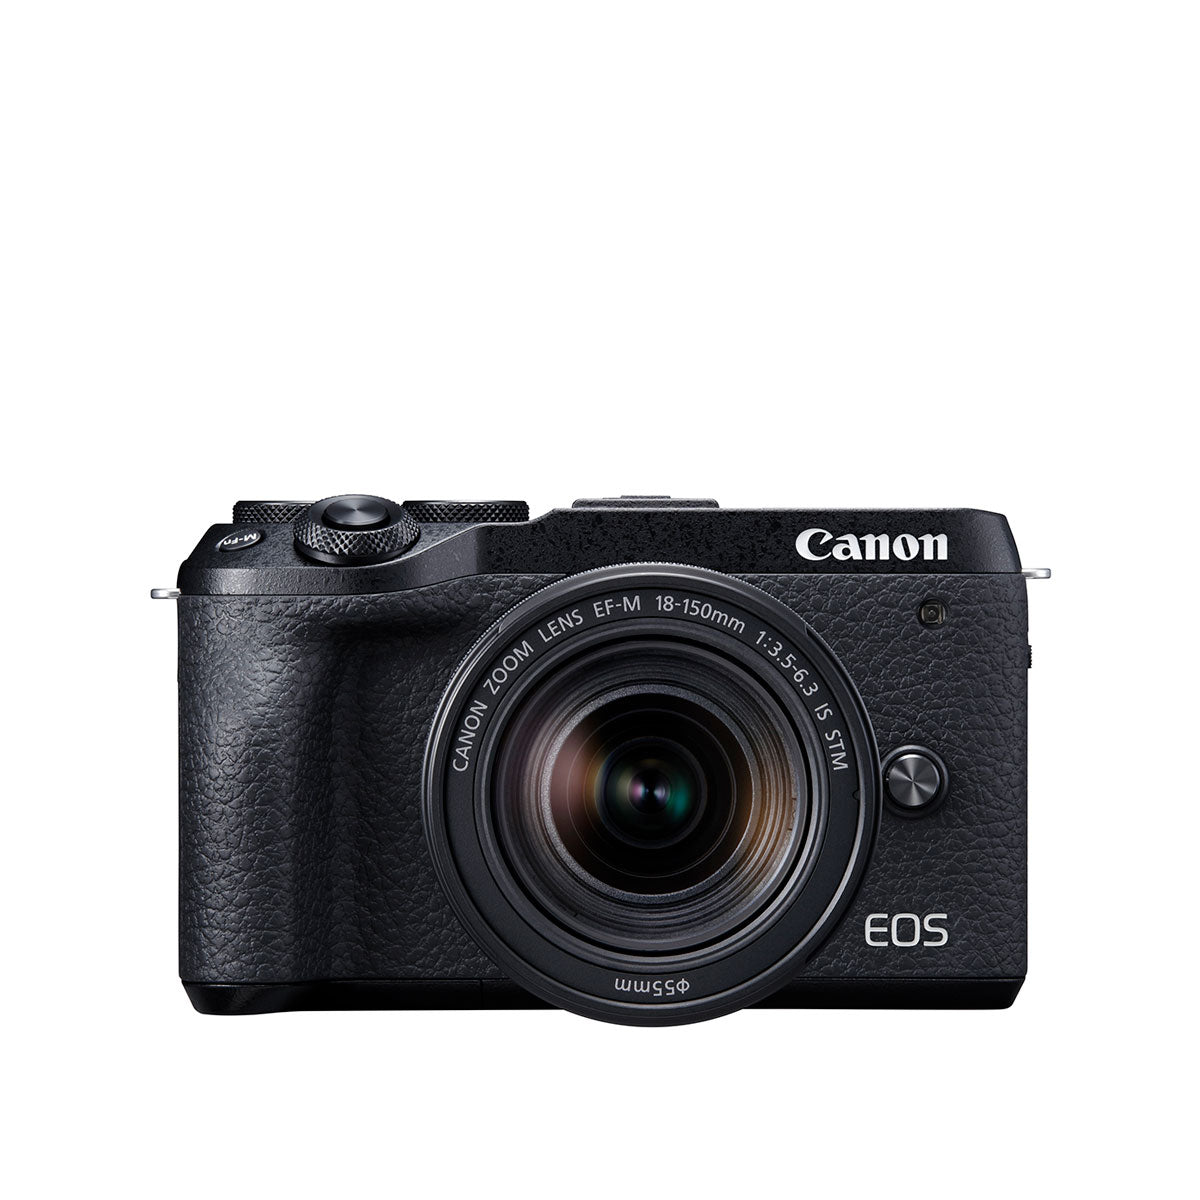 Canon EOS M6 Mark II Mirrorless Camera with EF-M 18-150mm IS STM Lens and EVF (Black)